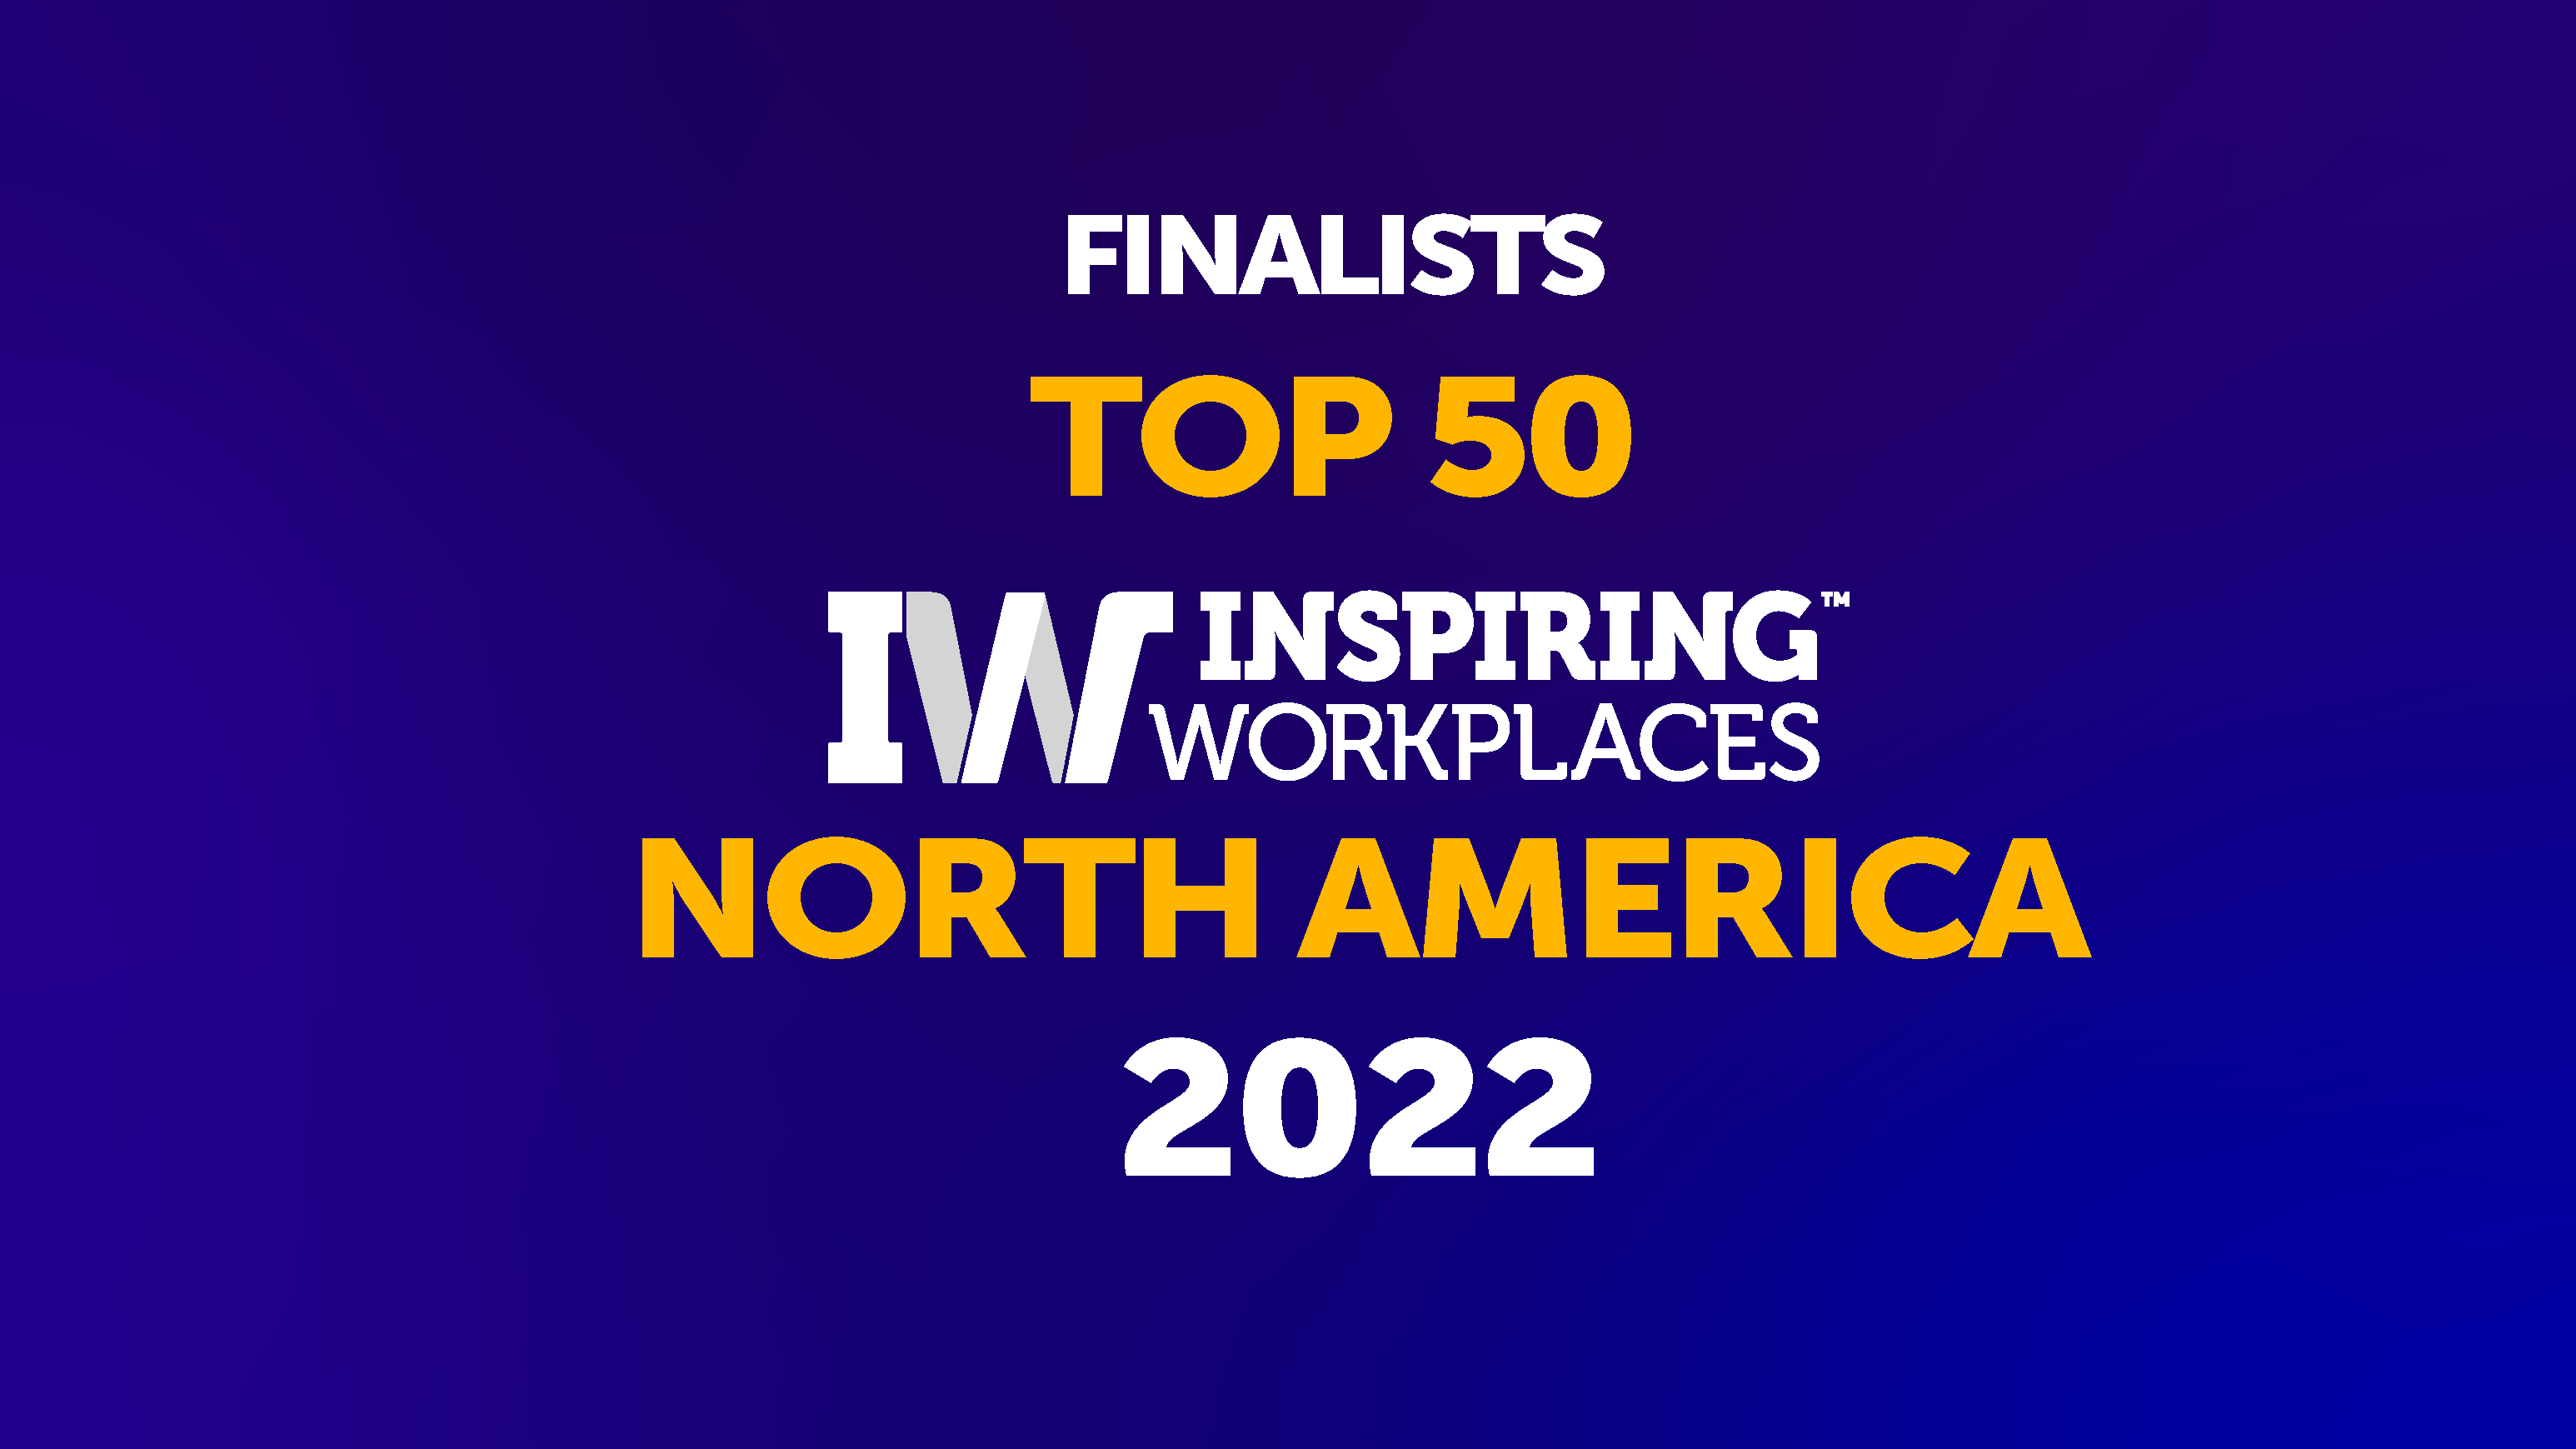 Inspiring Workplaces Awards finalists announced in North America